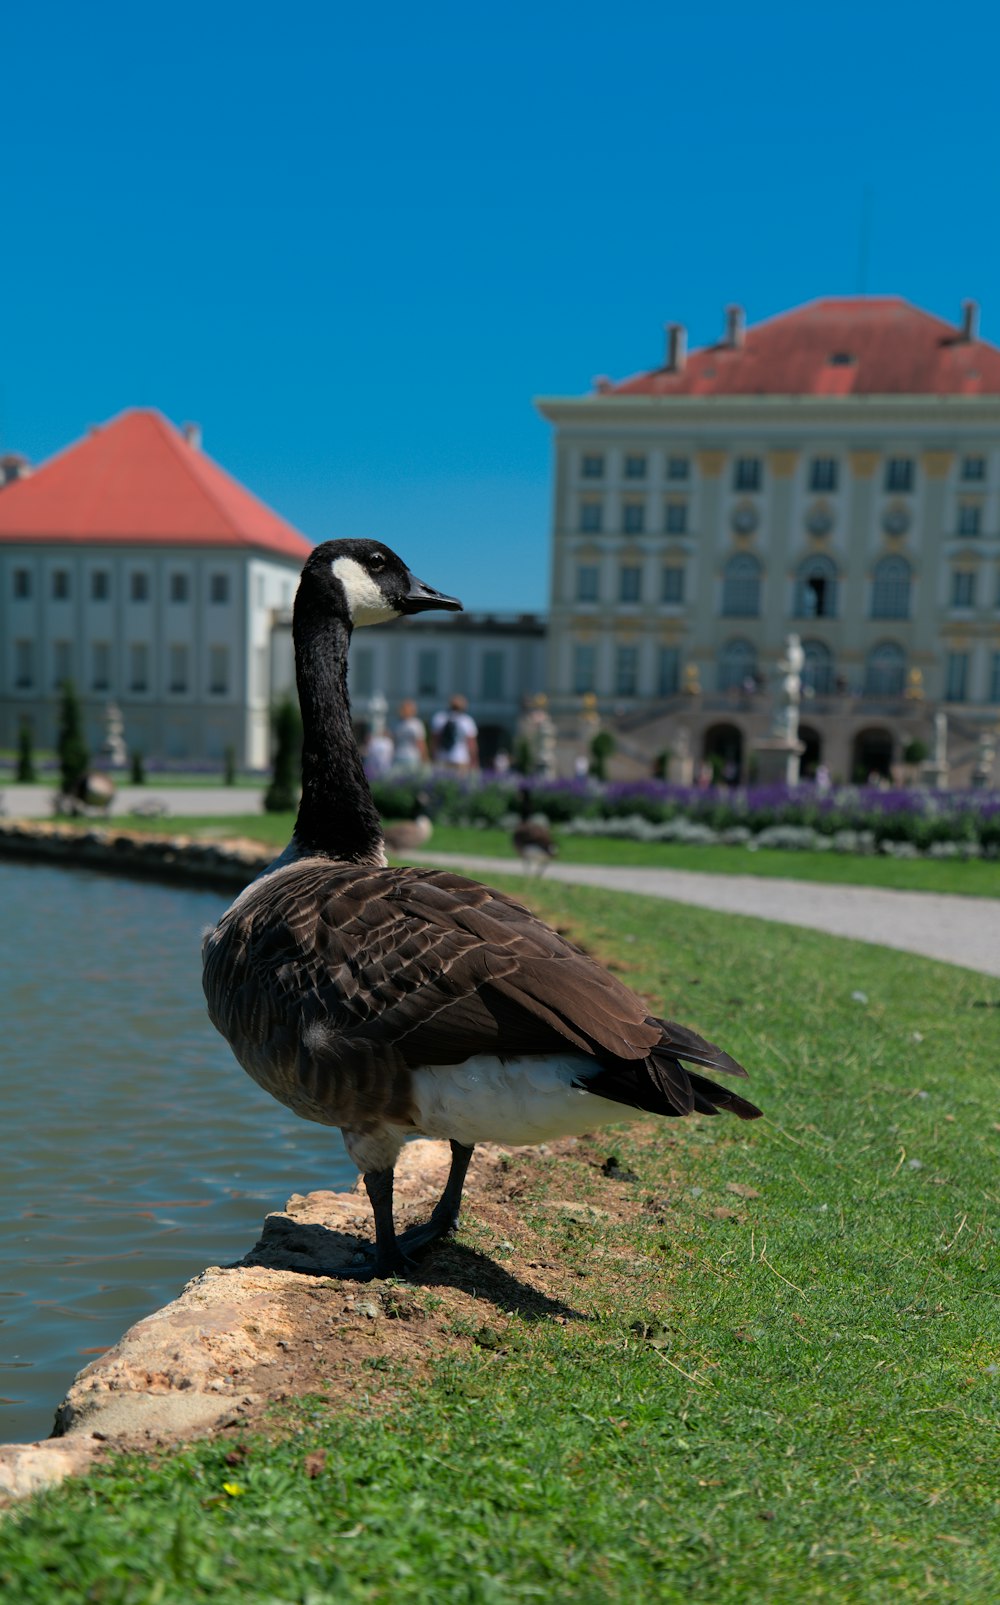 a goose standing on grass by a body of water